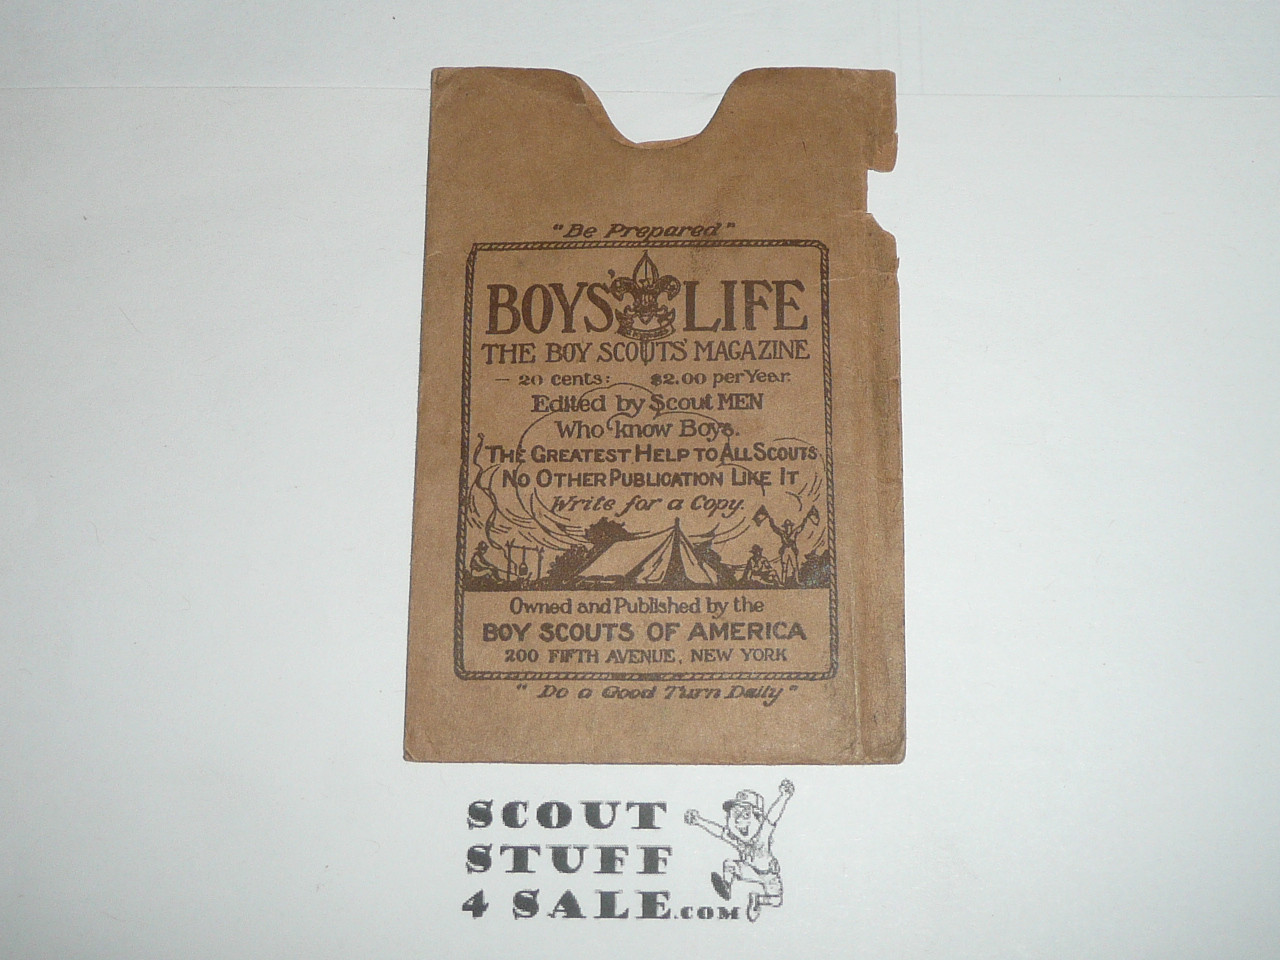 1923 Boy Scout Adult Membership Card, 3-fold, with the Envelope, 6 signatures, expires April 1923, BSMC202